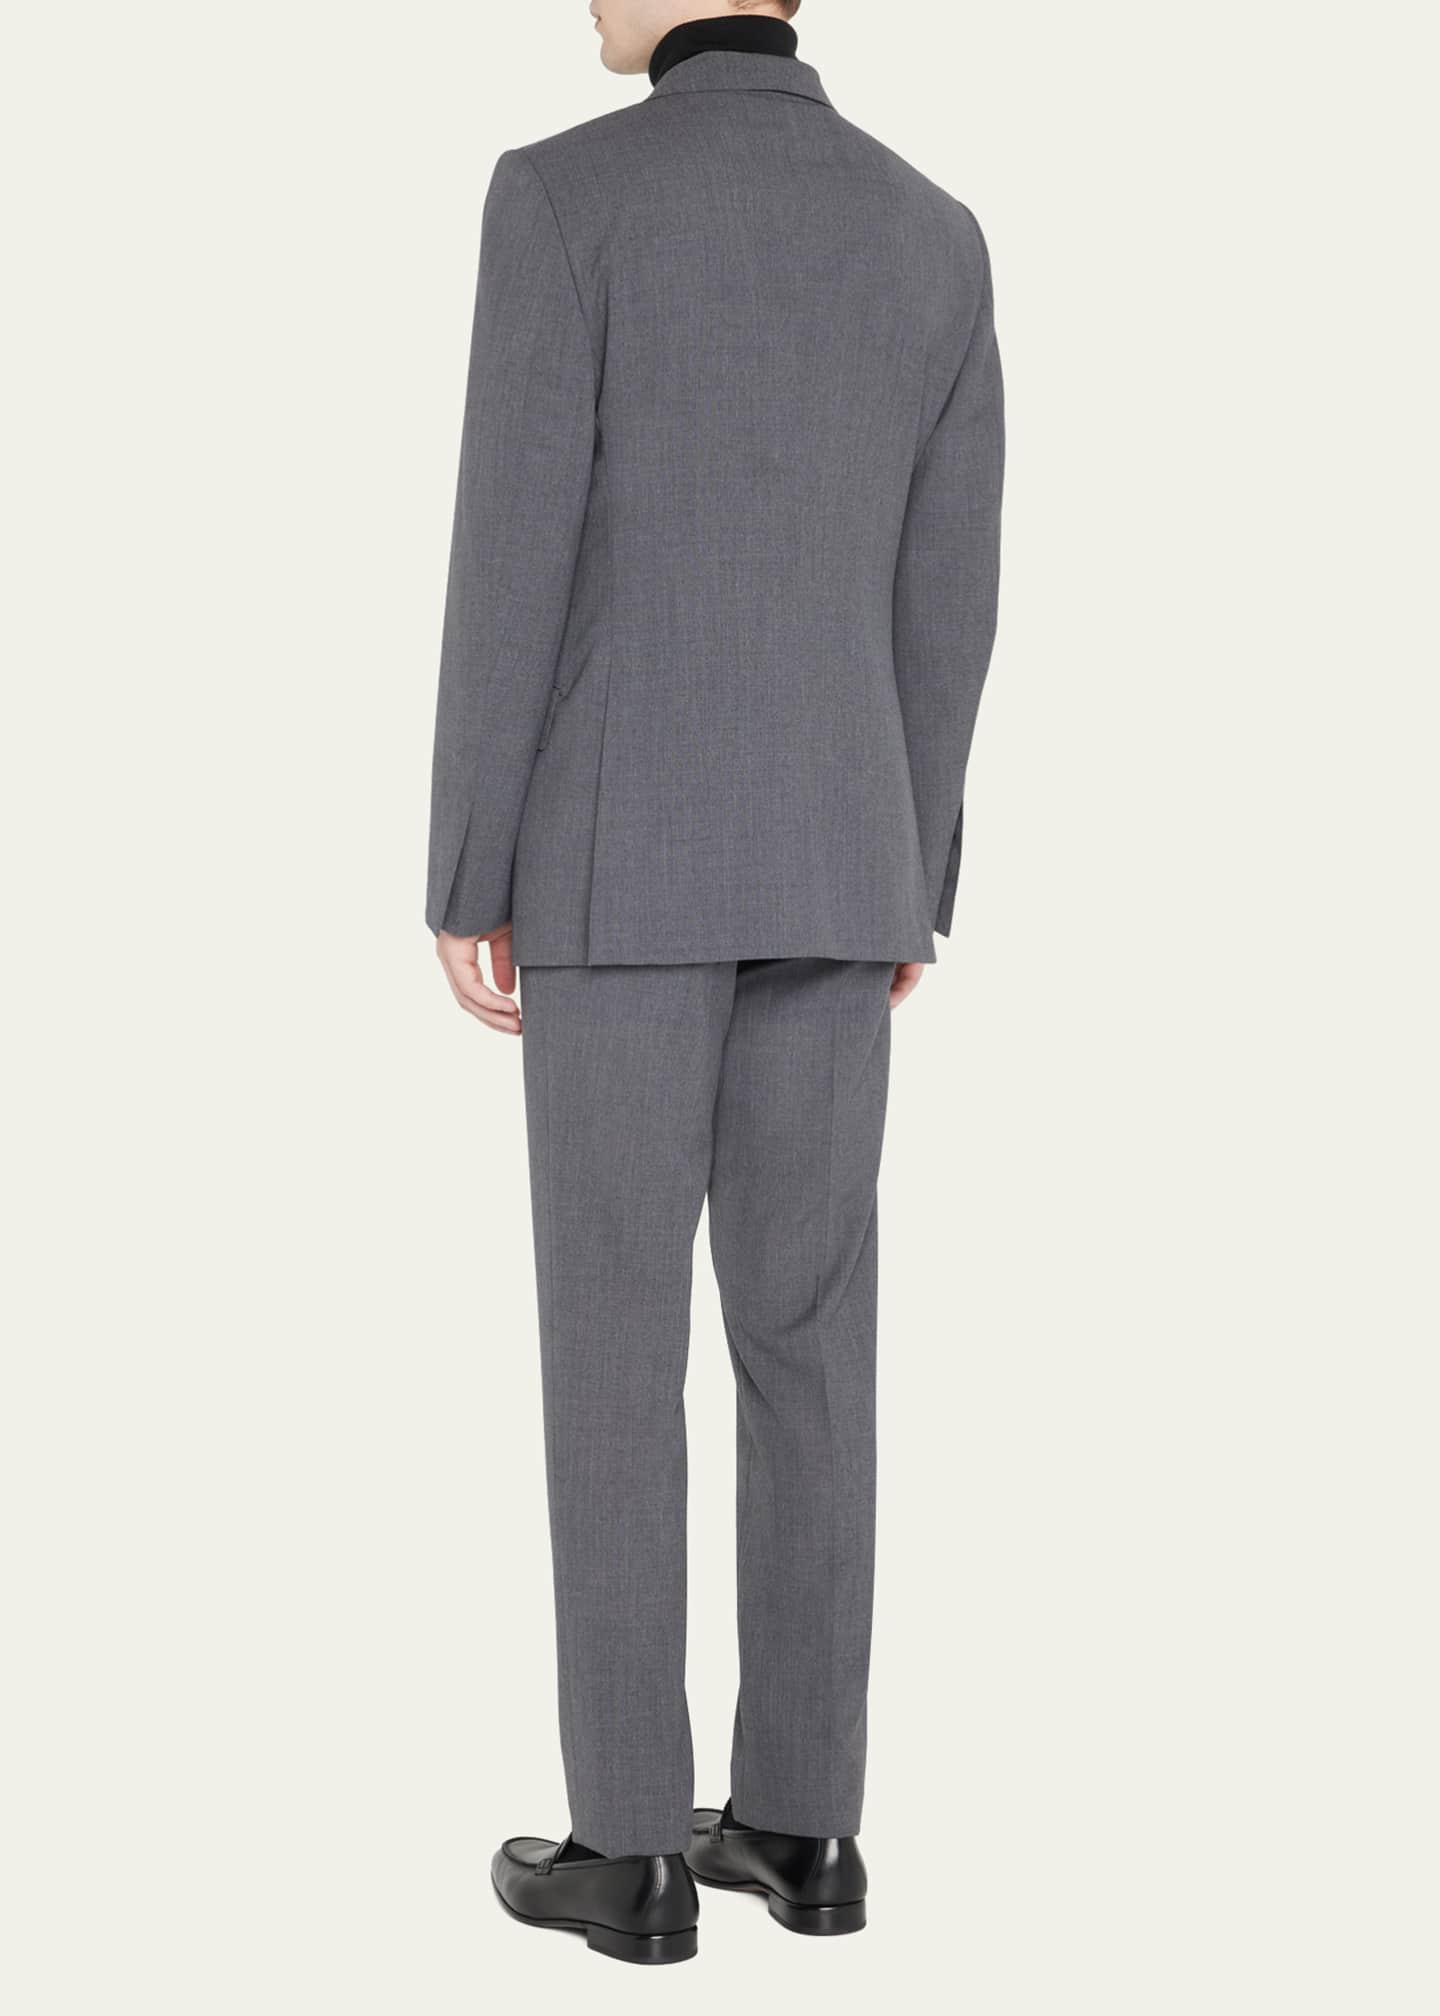 TOM FORD Men's O'Connor Solid Wool Suit - Bergdorf Goodman